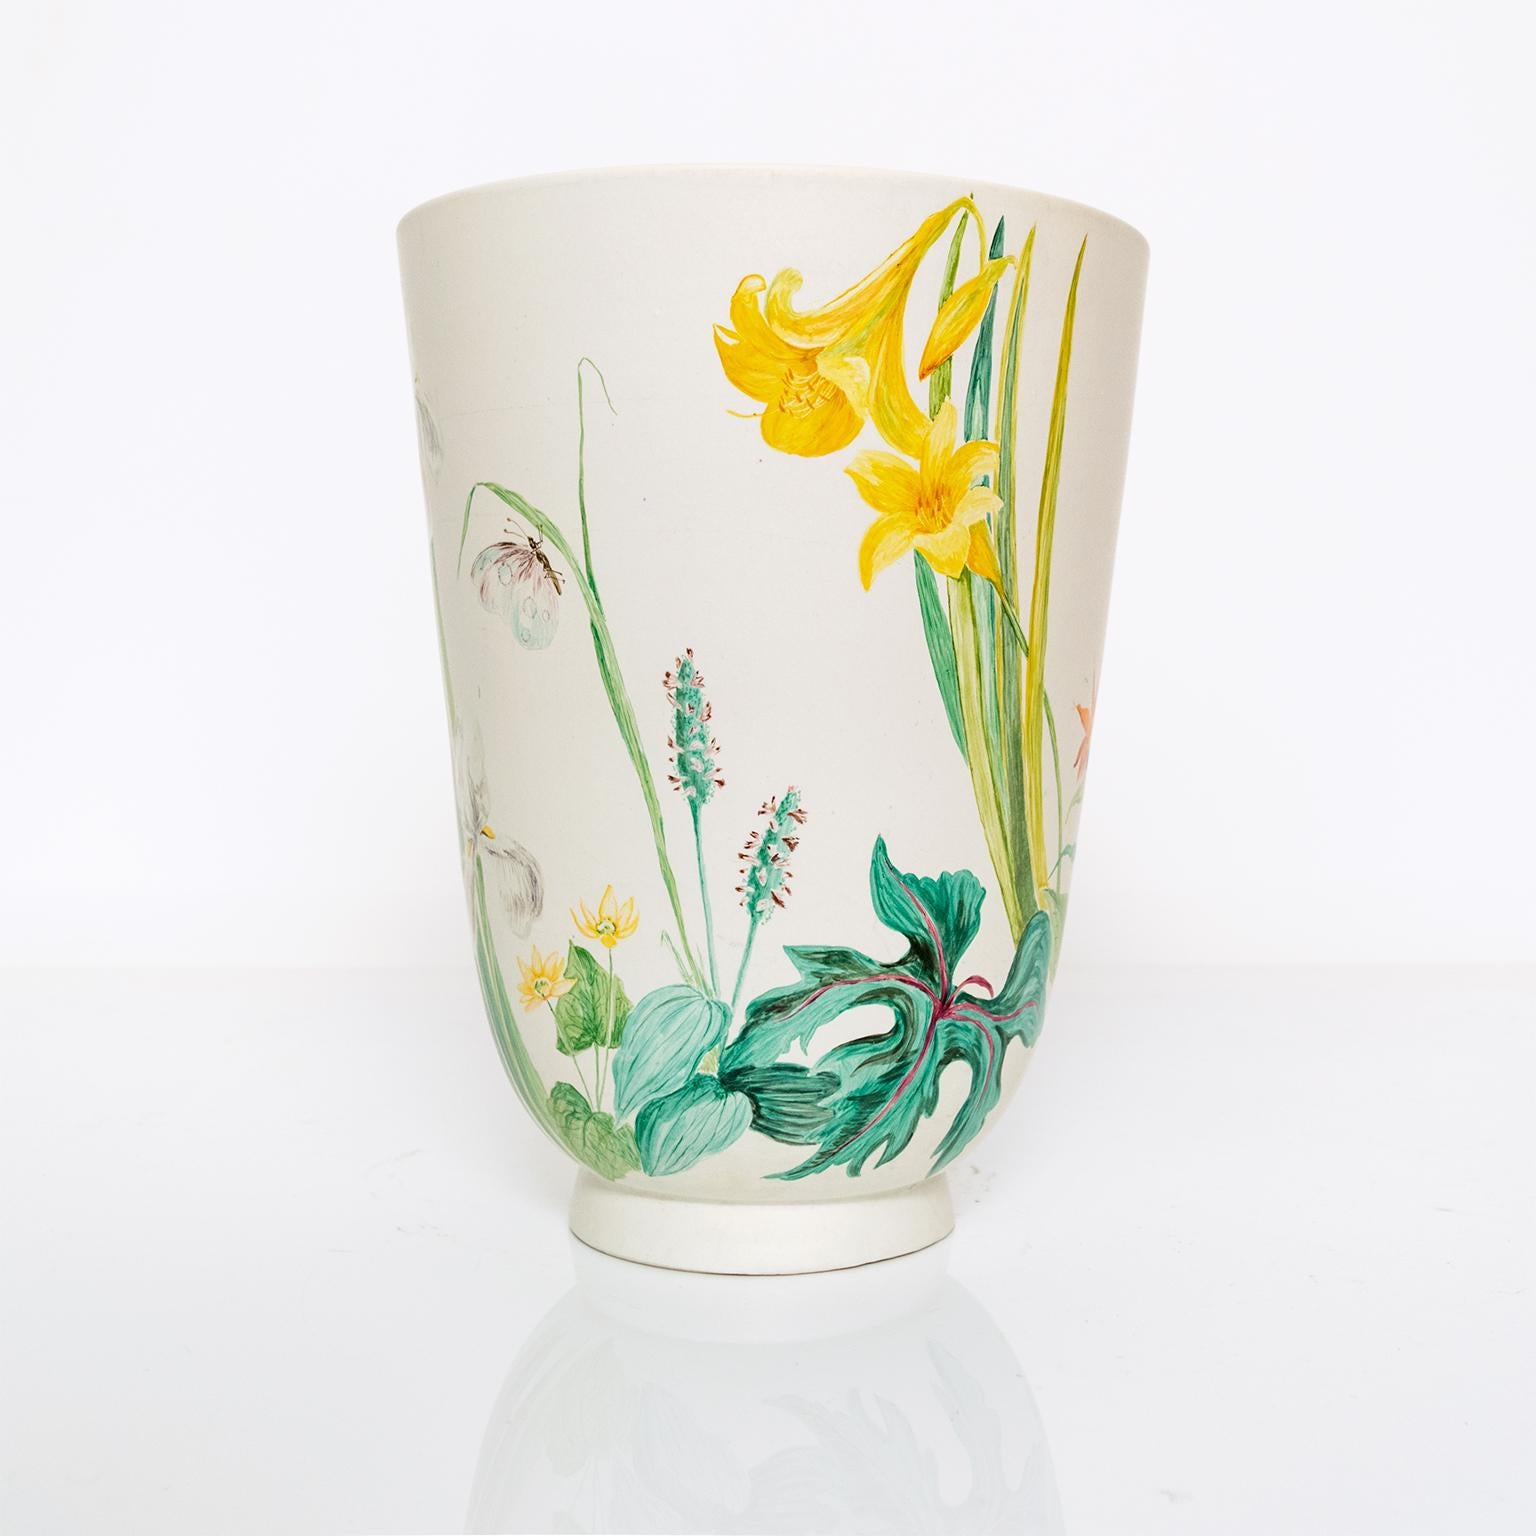 A large hand decorated ceramic vase, form designed by Wilhelm Kage for Gustavsberg. The vase depicts a close up view of a garden with various flowers and a mouse. Very good condition with some glaze lost in the internal bottom. 

Height: 12”